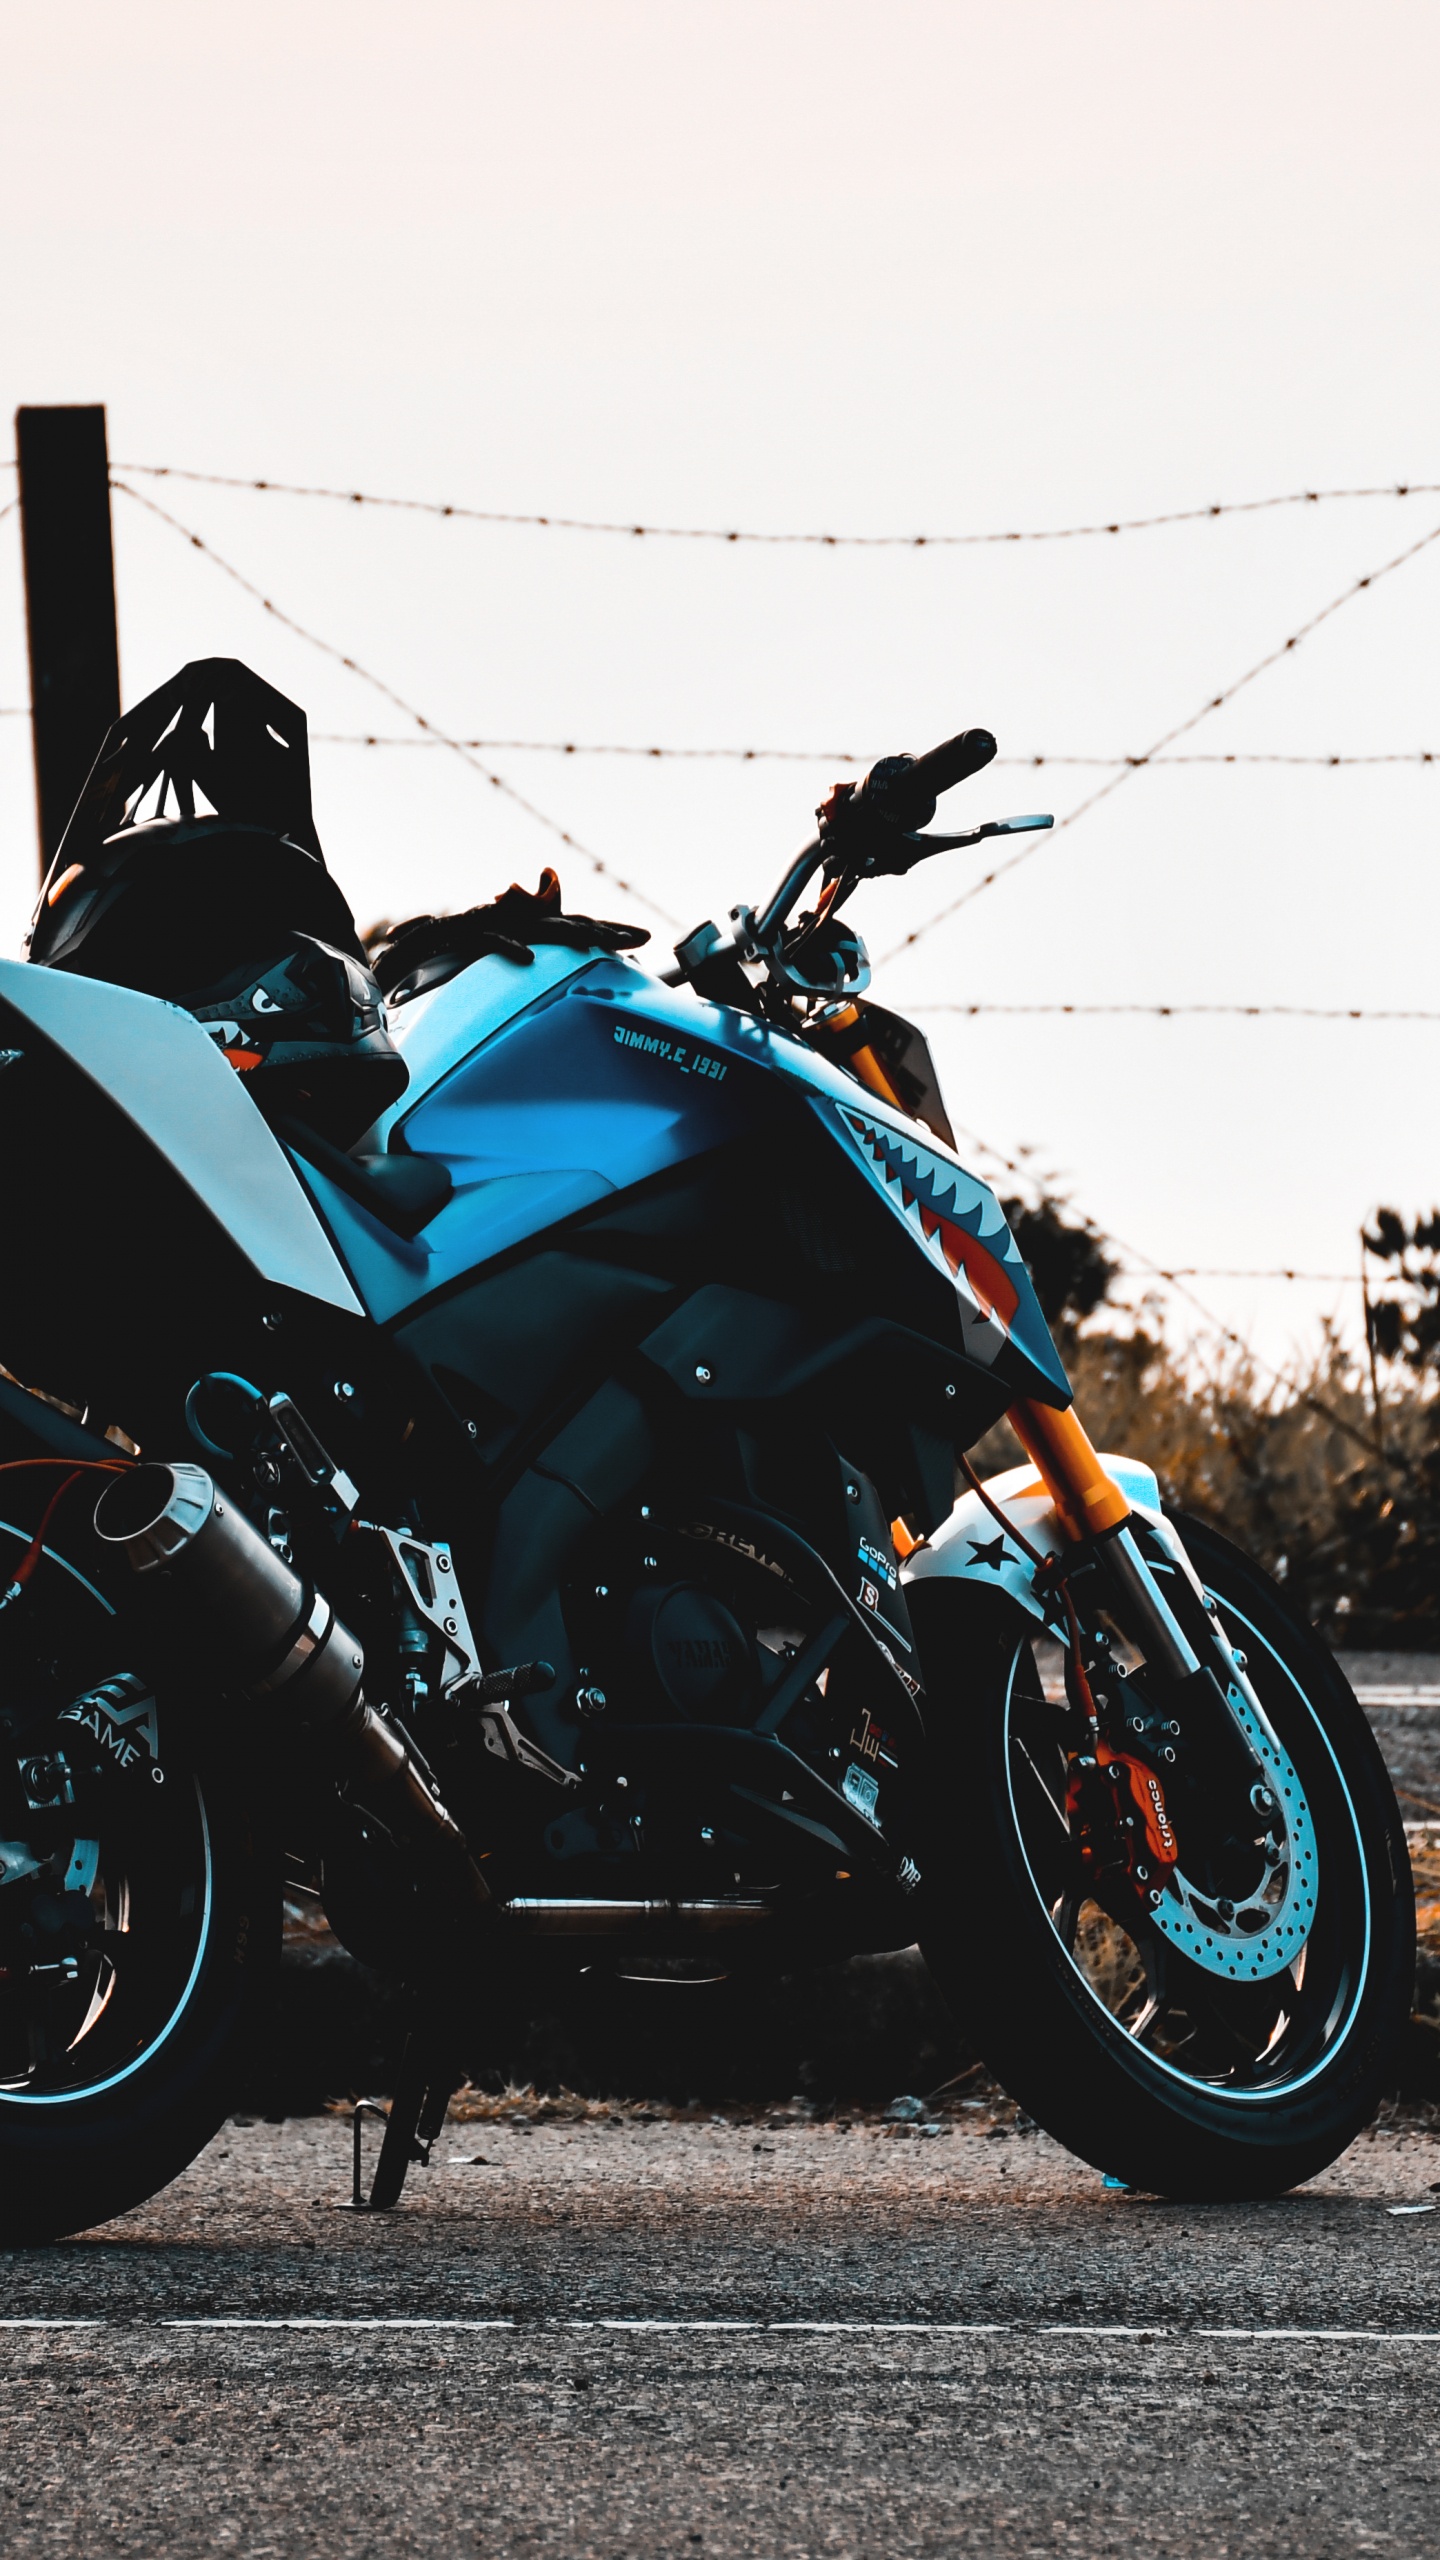 Black and Blue Sports Bike Parked on Gray Concrete Road During Daytime. Wallpaper in 1440x2560 Resolution